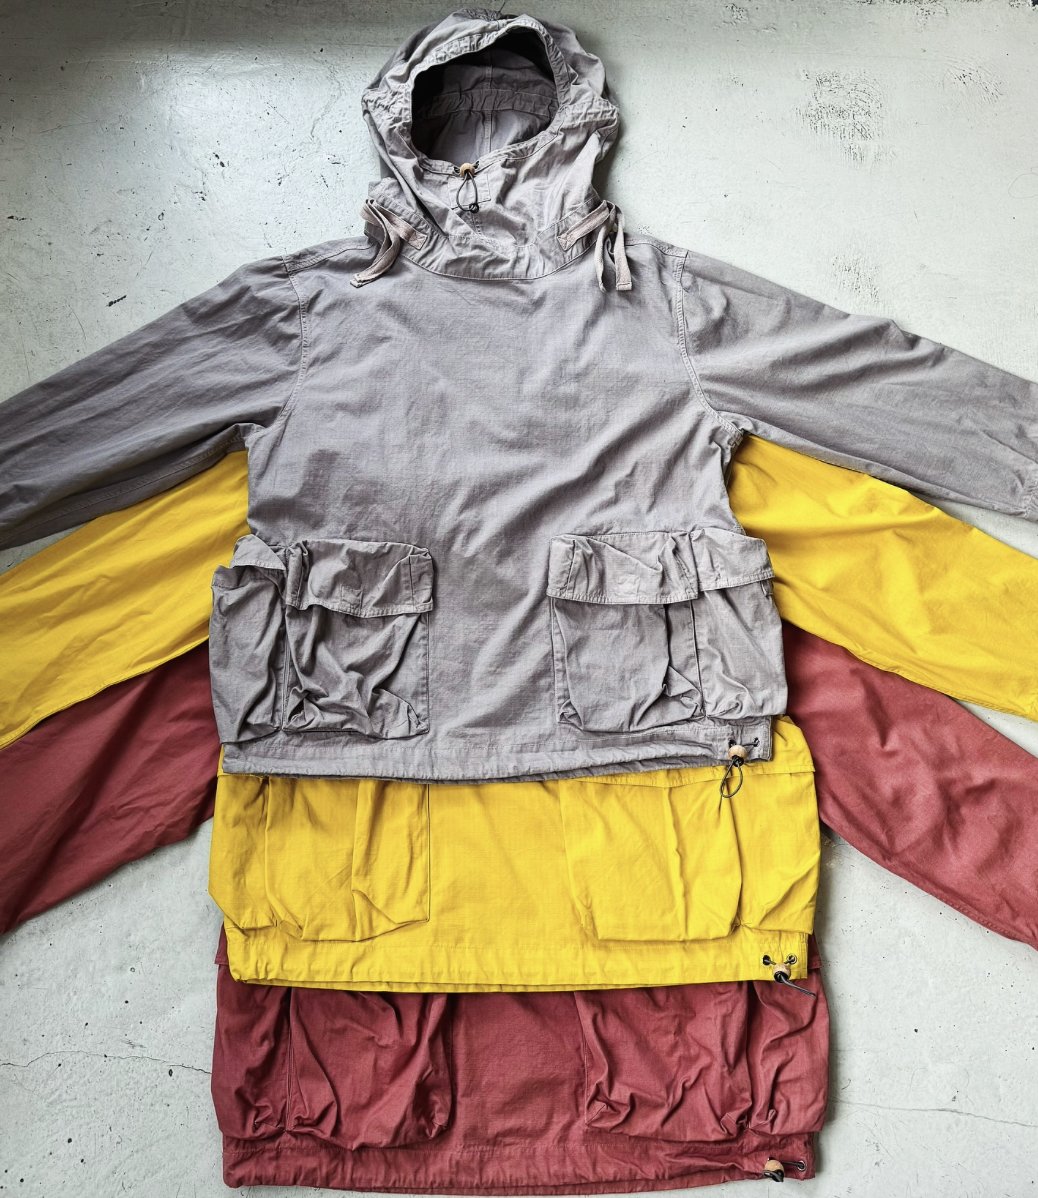 Hawker smock in cotton ripstop, garment dyed smoke grey, yellow & dusty pink. Contact: info@hawkwoodmercantile.com #hawkwoodmercantile #hawkwood #menswear #outerwear #smock #smocks #jackets #jacket #coats #coat #garmentdyed #ripstop